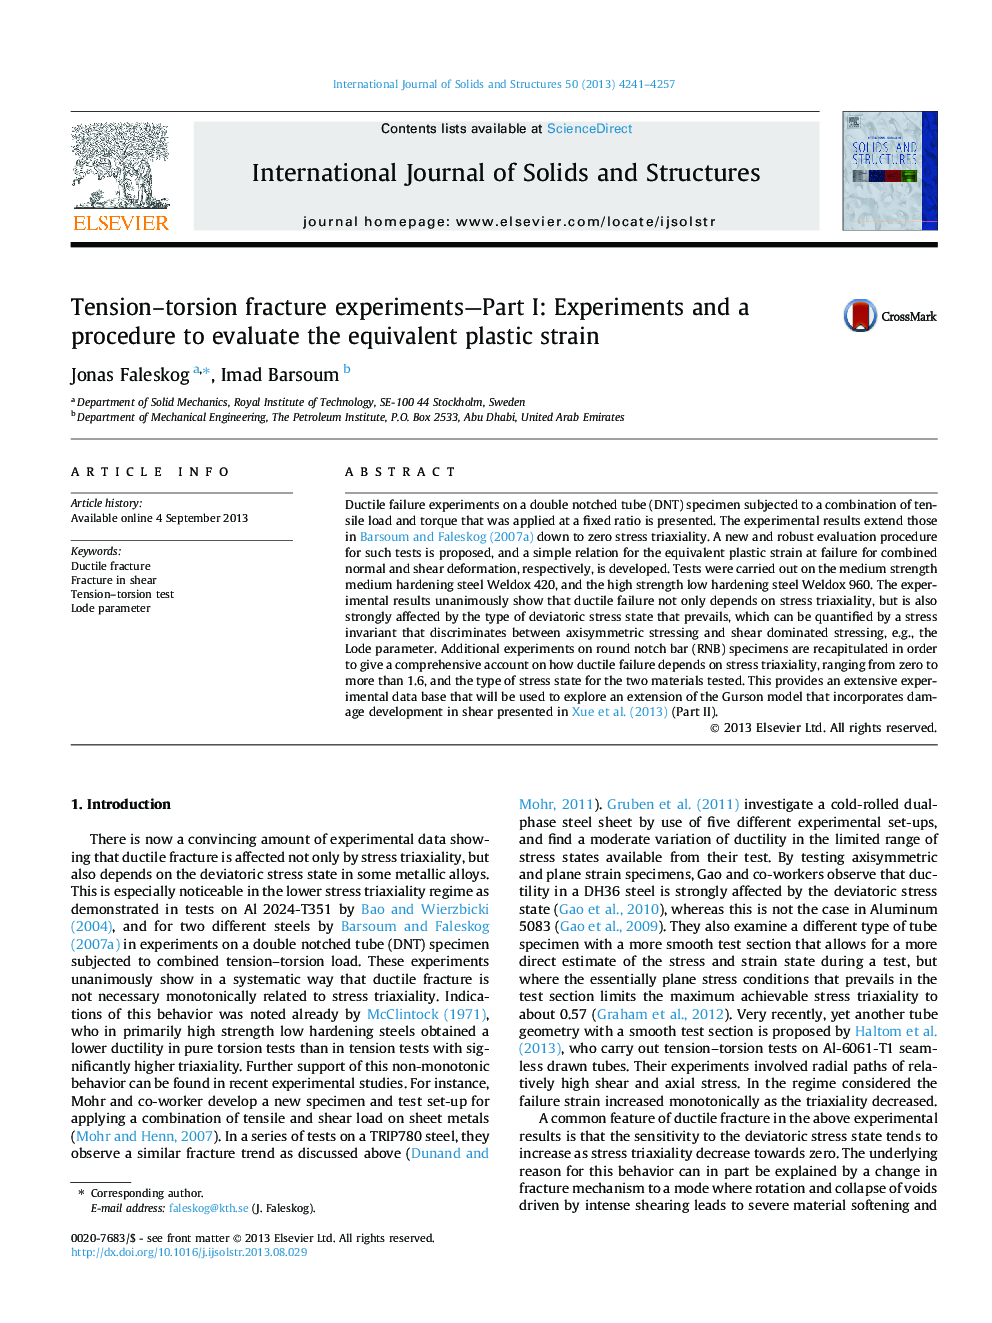 Tension–torsion fracture experiments—Part I: Experiments and a procedure to evaluate the equivalent plastic strain